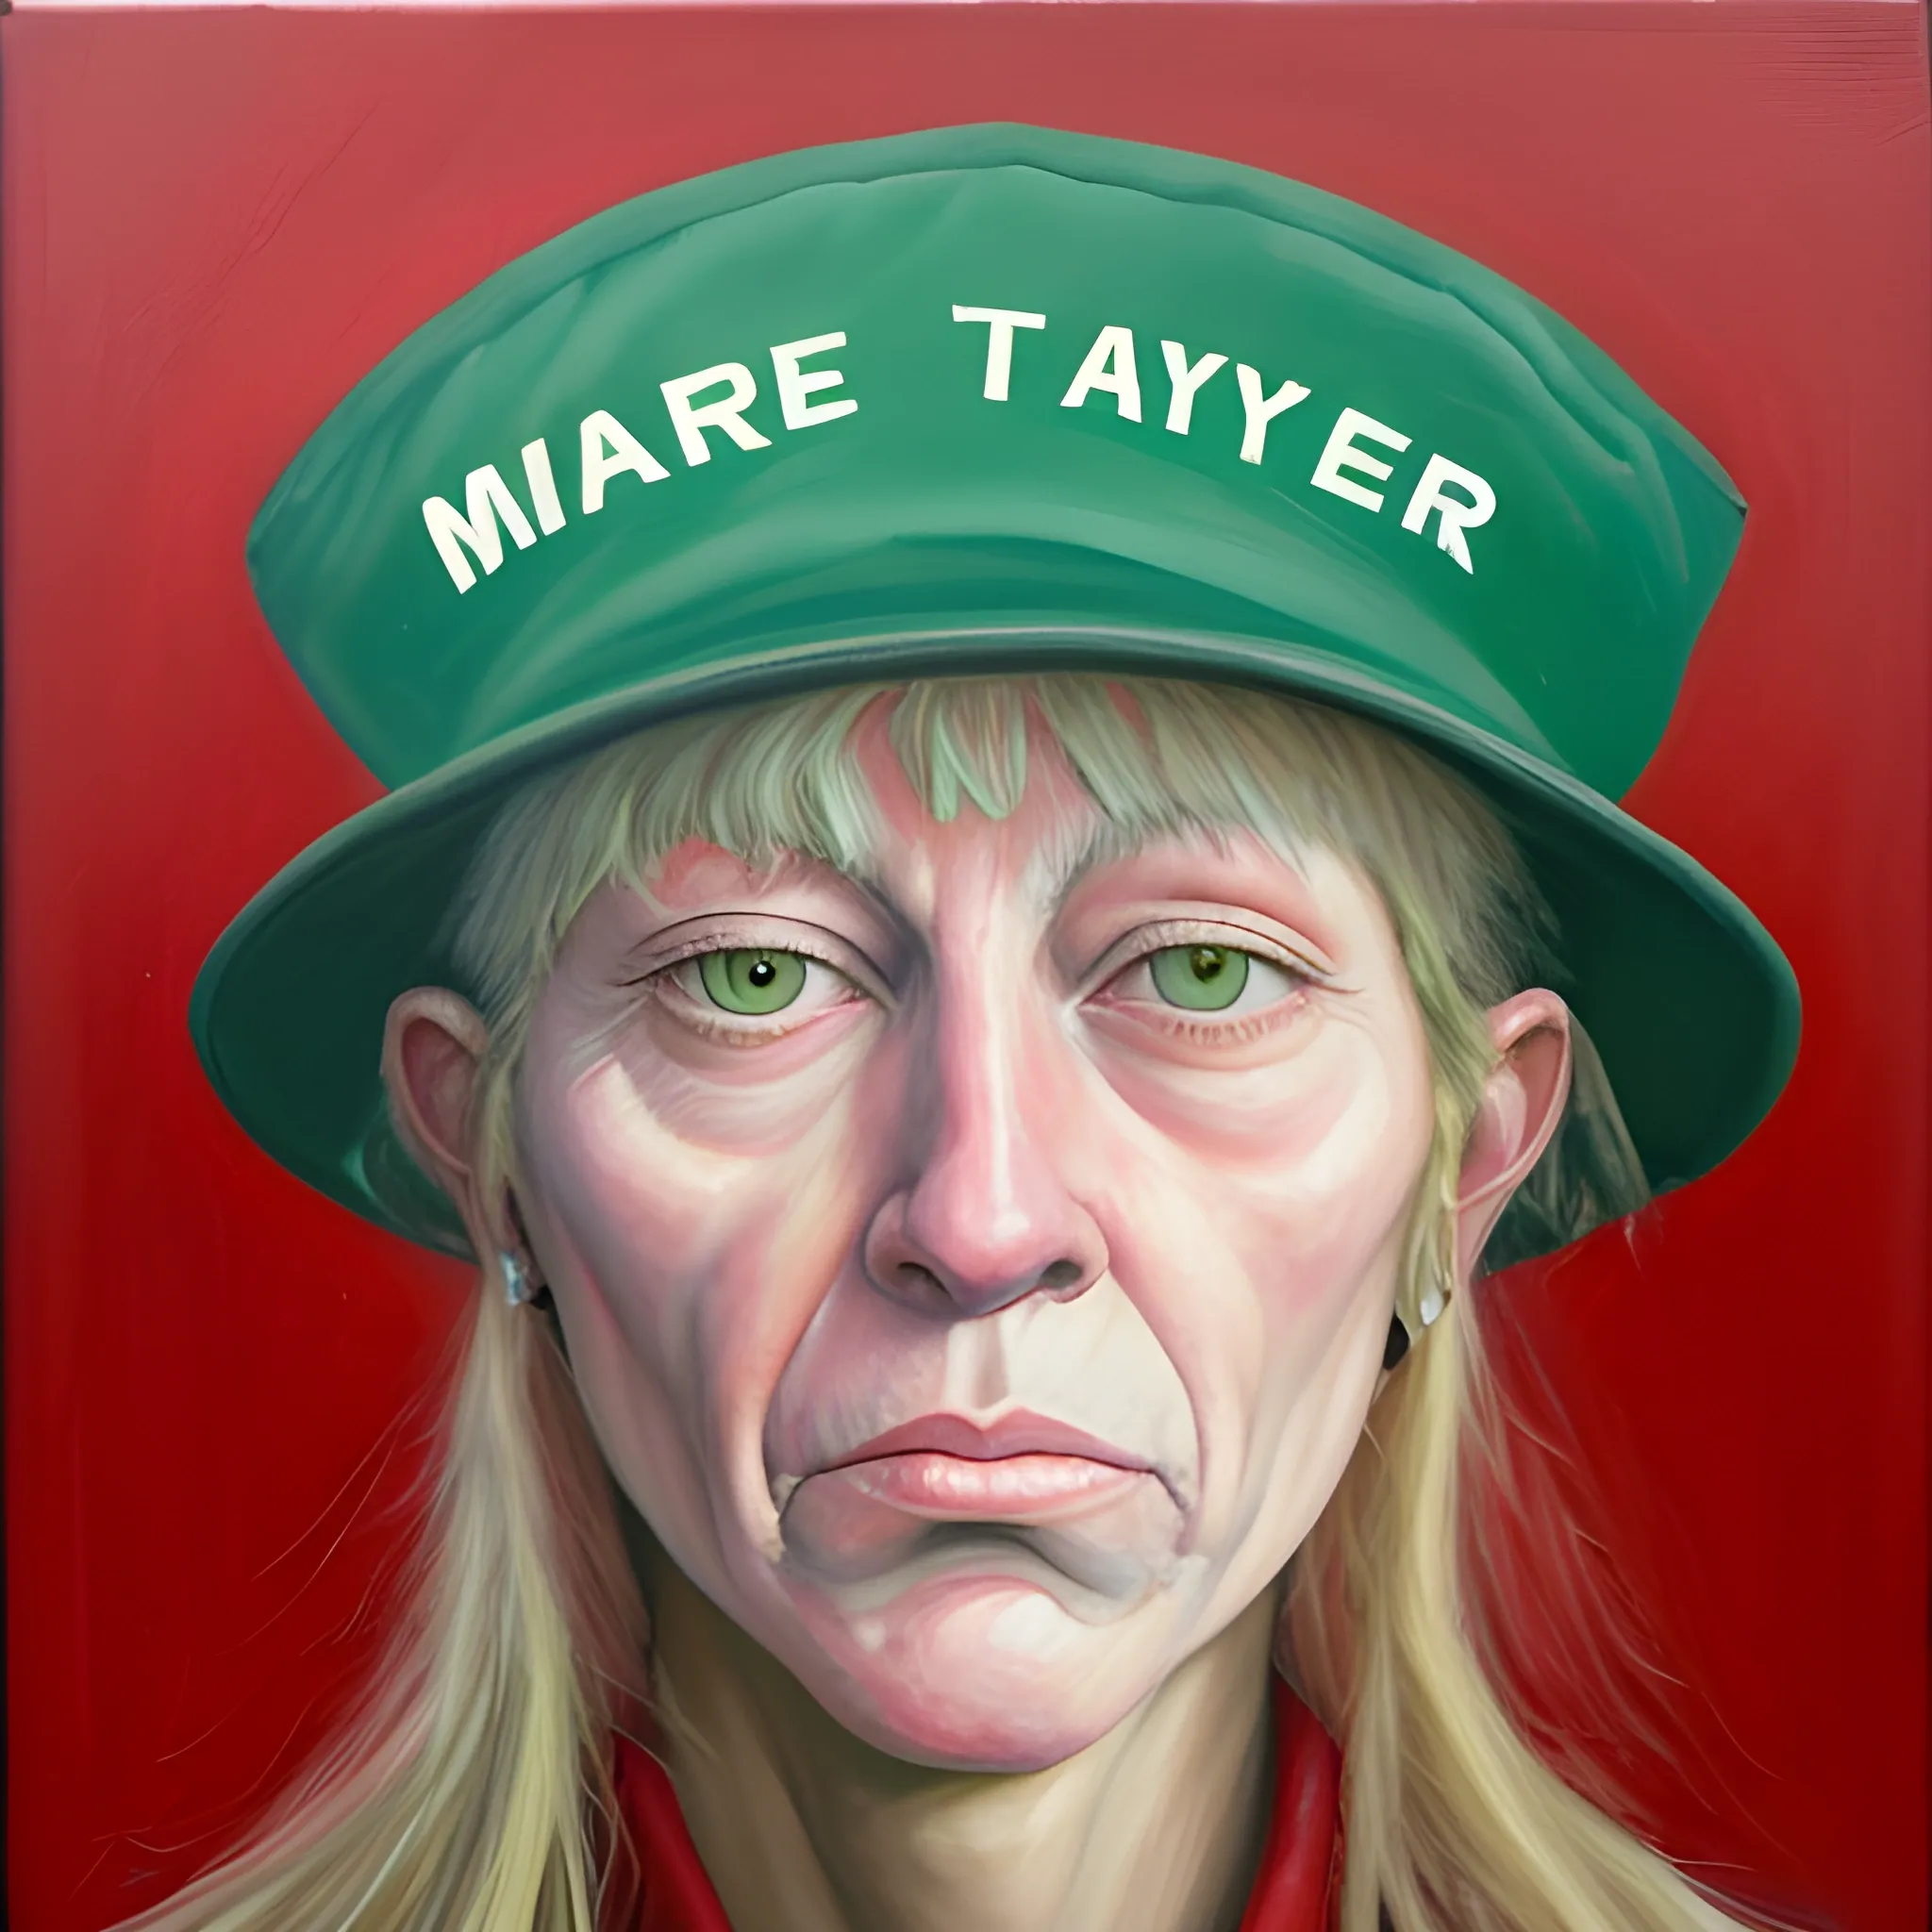  Oil Painting,
marjorie taylor green, ugly, dyke,red  maga hat 
